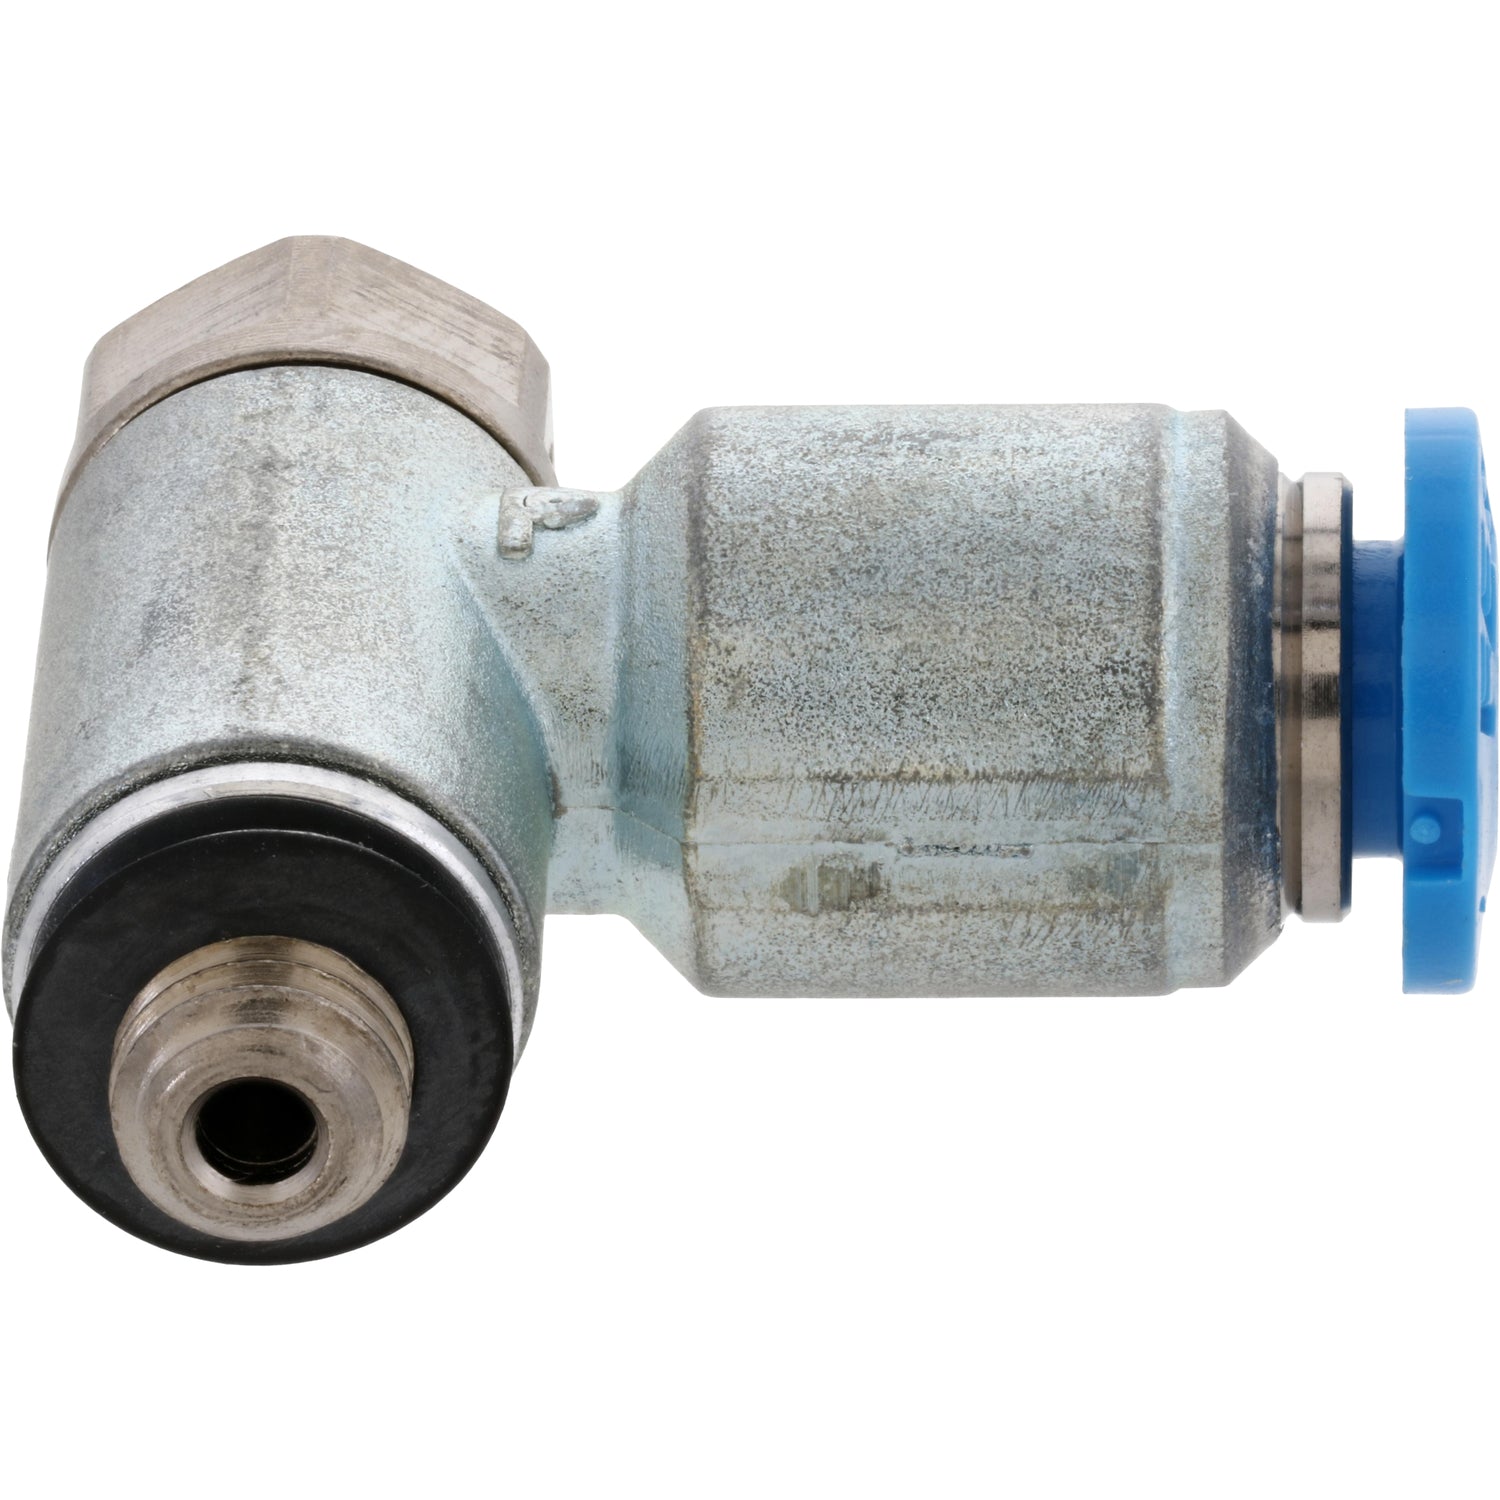 One-way flow control valve with blue press connect collar and exposed threads. Part shown on white background.